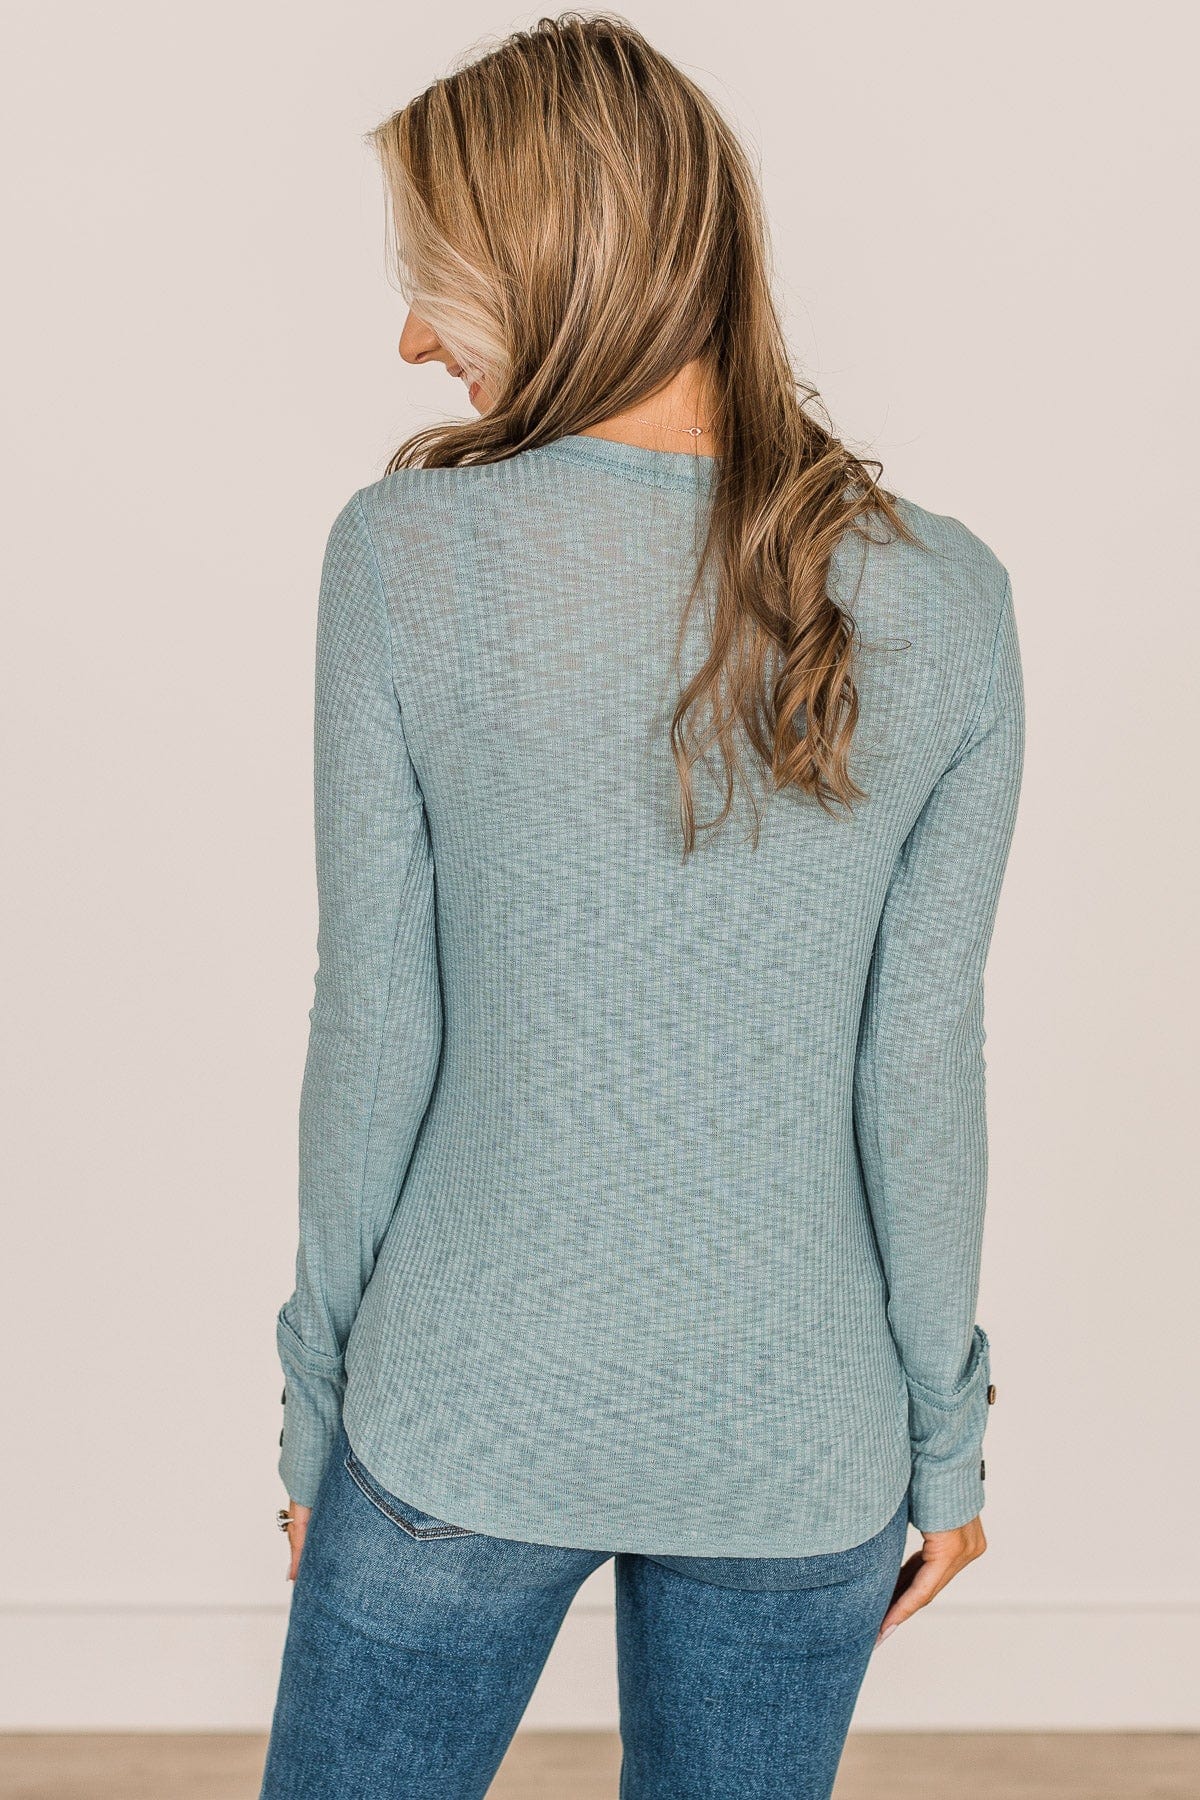 Better Than Ever Long Sleeve Knit Top- Light Teal – The Pulse Boutique